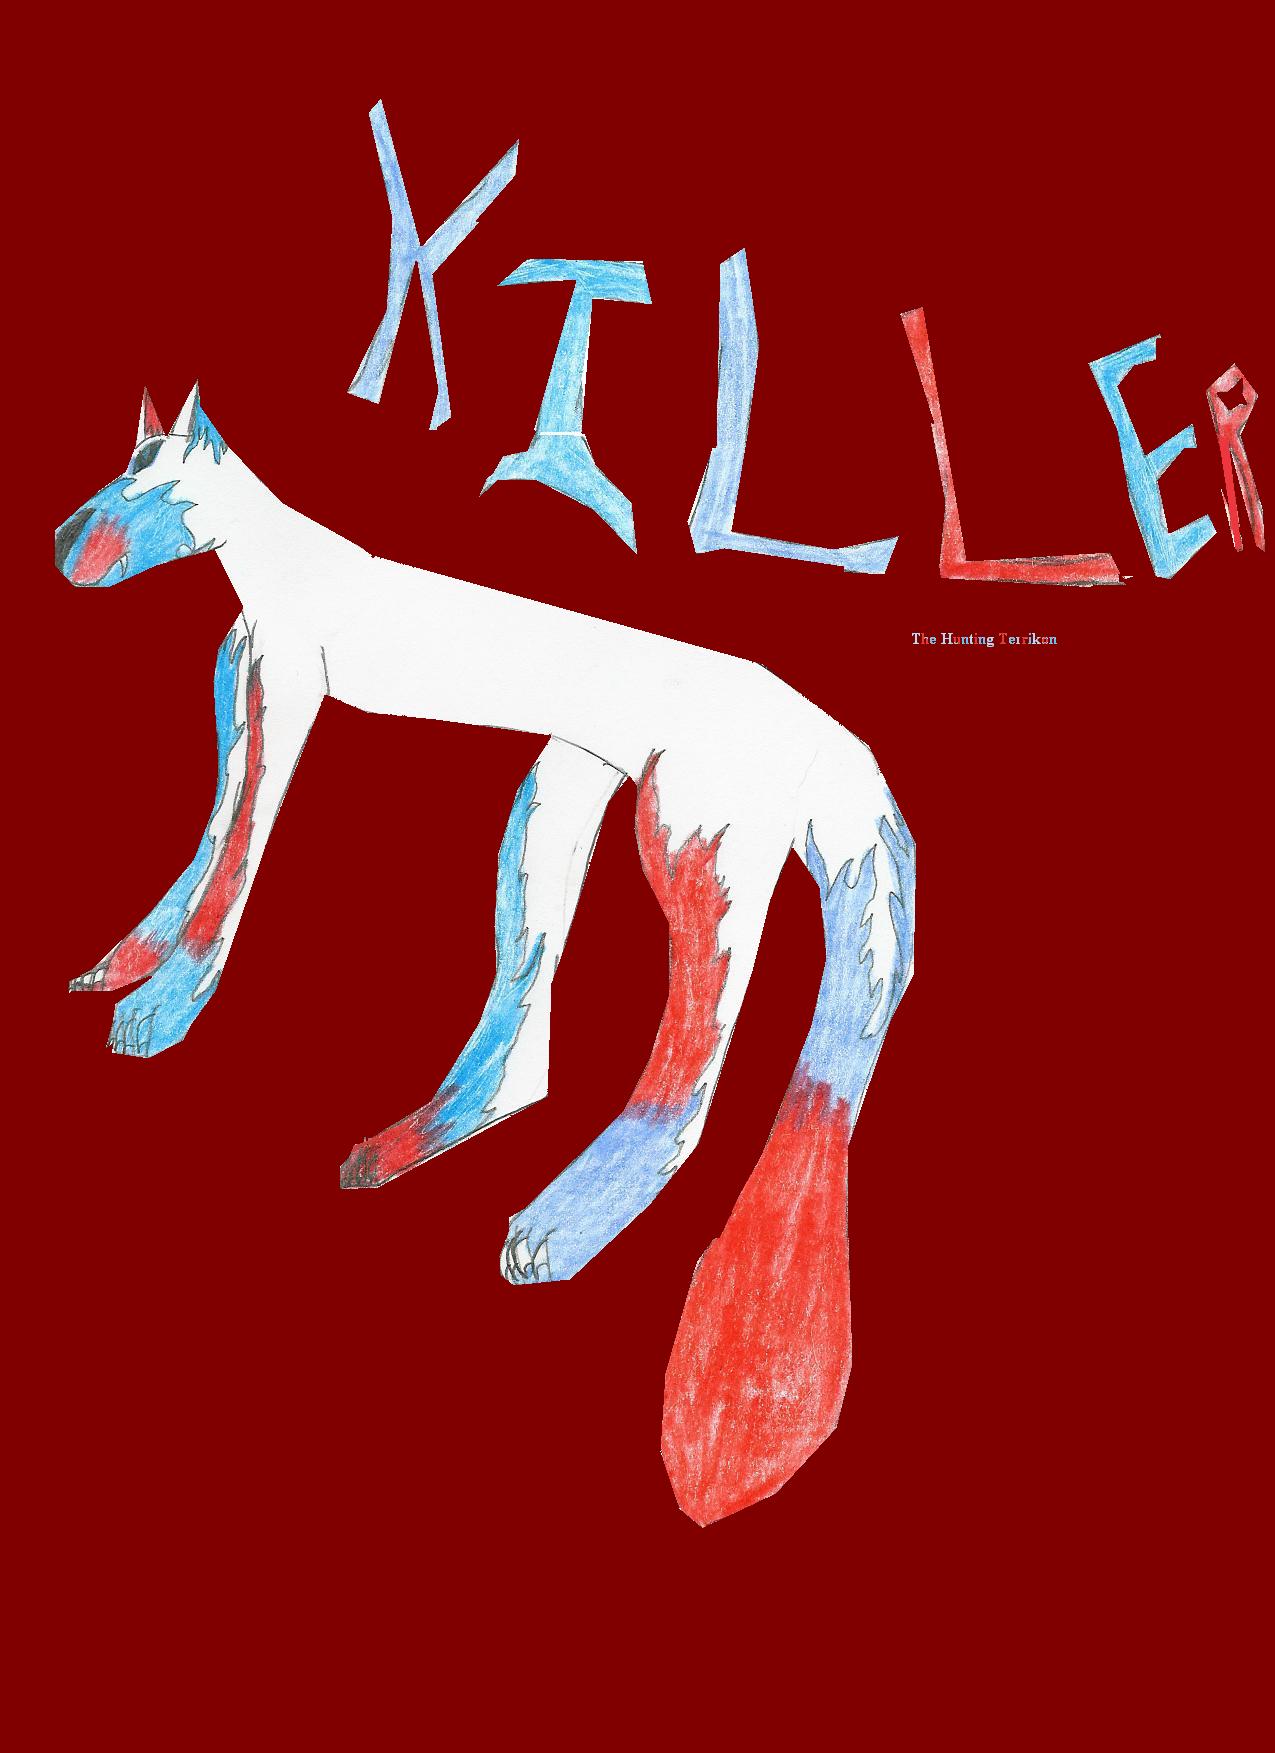 Killer, the killing terrikon by winged_white_wolf